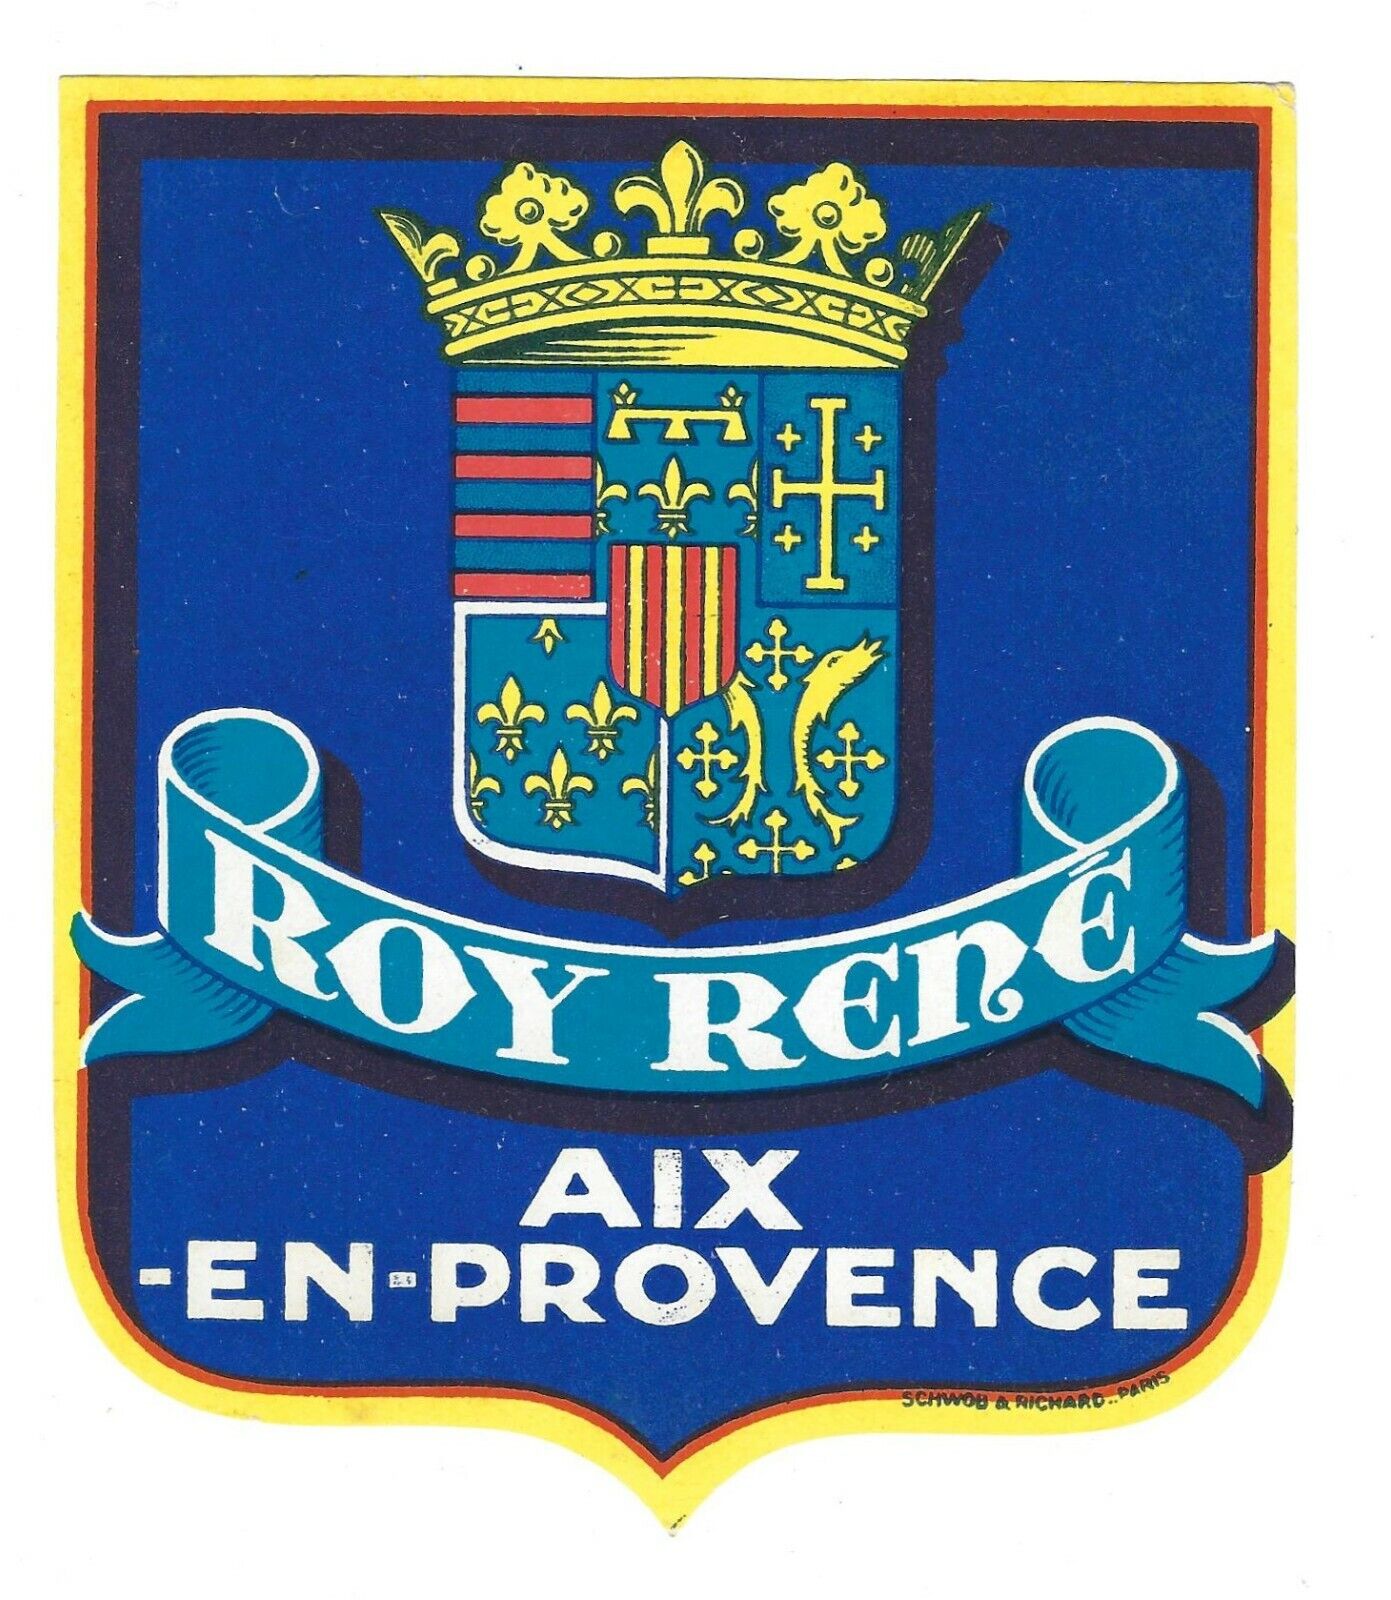 AIX-EN-PROVENCE FRANCE HOTEL ROY RENE VINTAGE LUGGAGE LABEL GREAT CONDITION